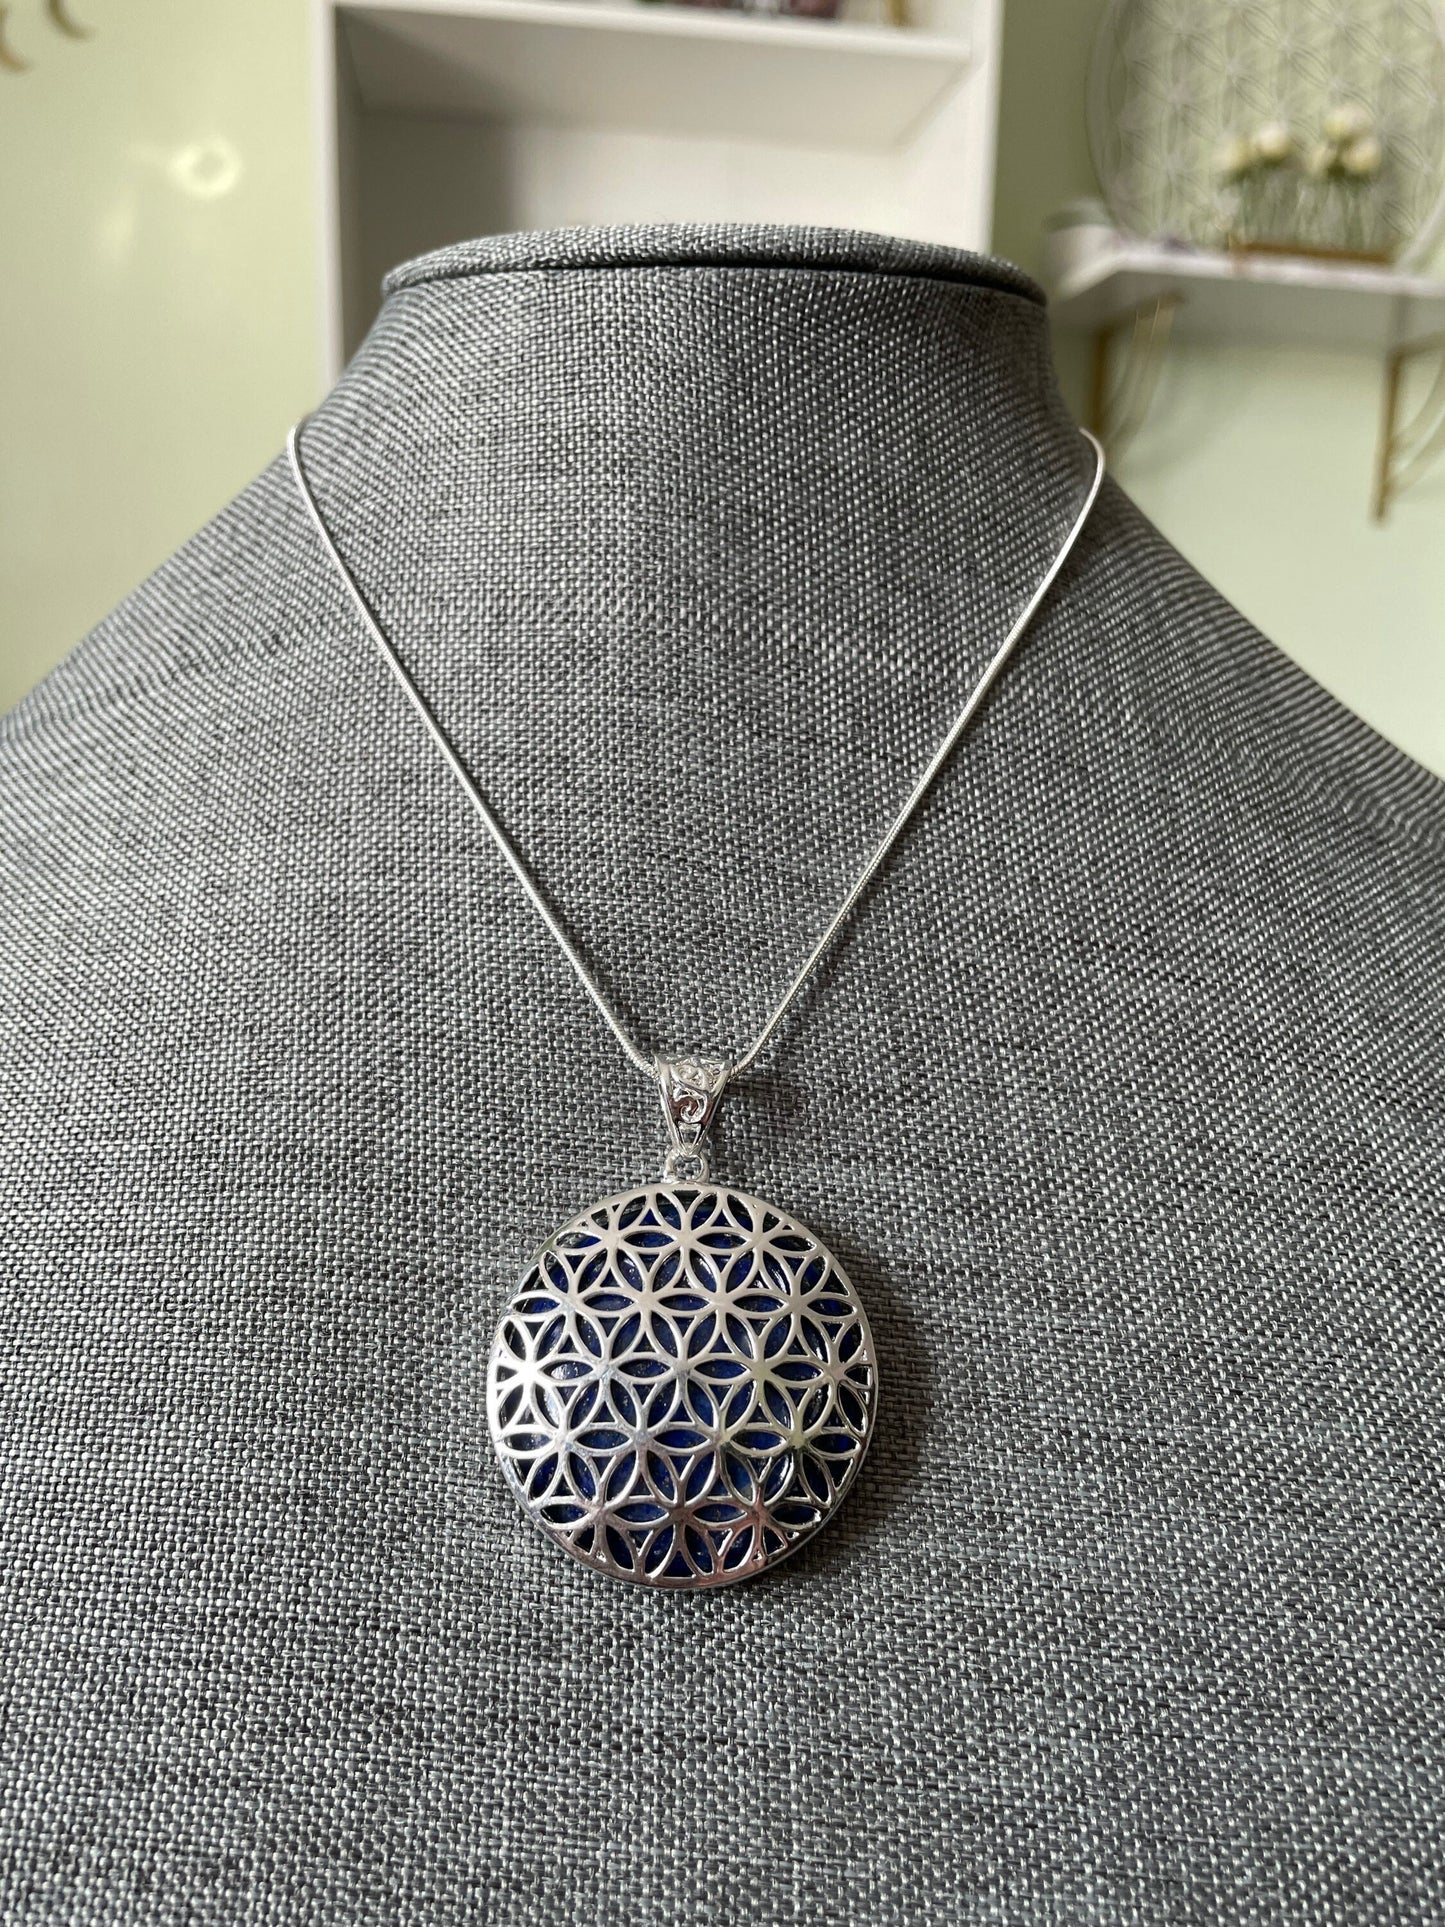 Silver round Flower of Life Lapis Lazuli crystal necklace on 16+ inch silver plated chain